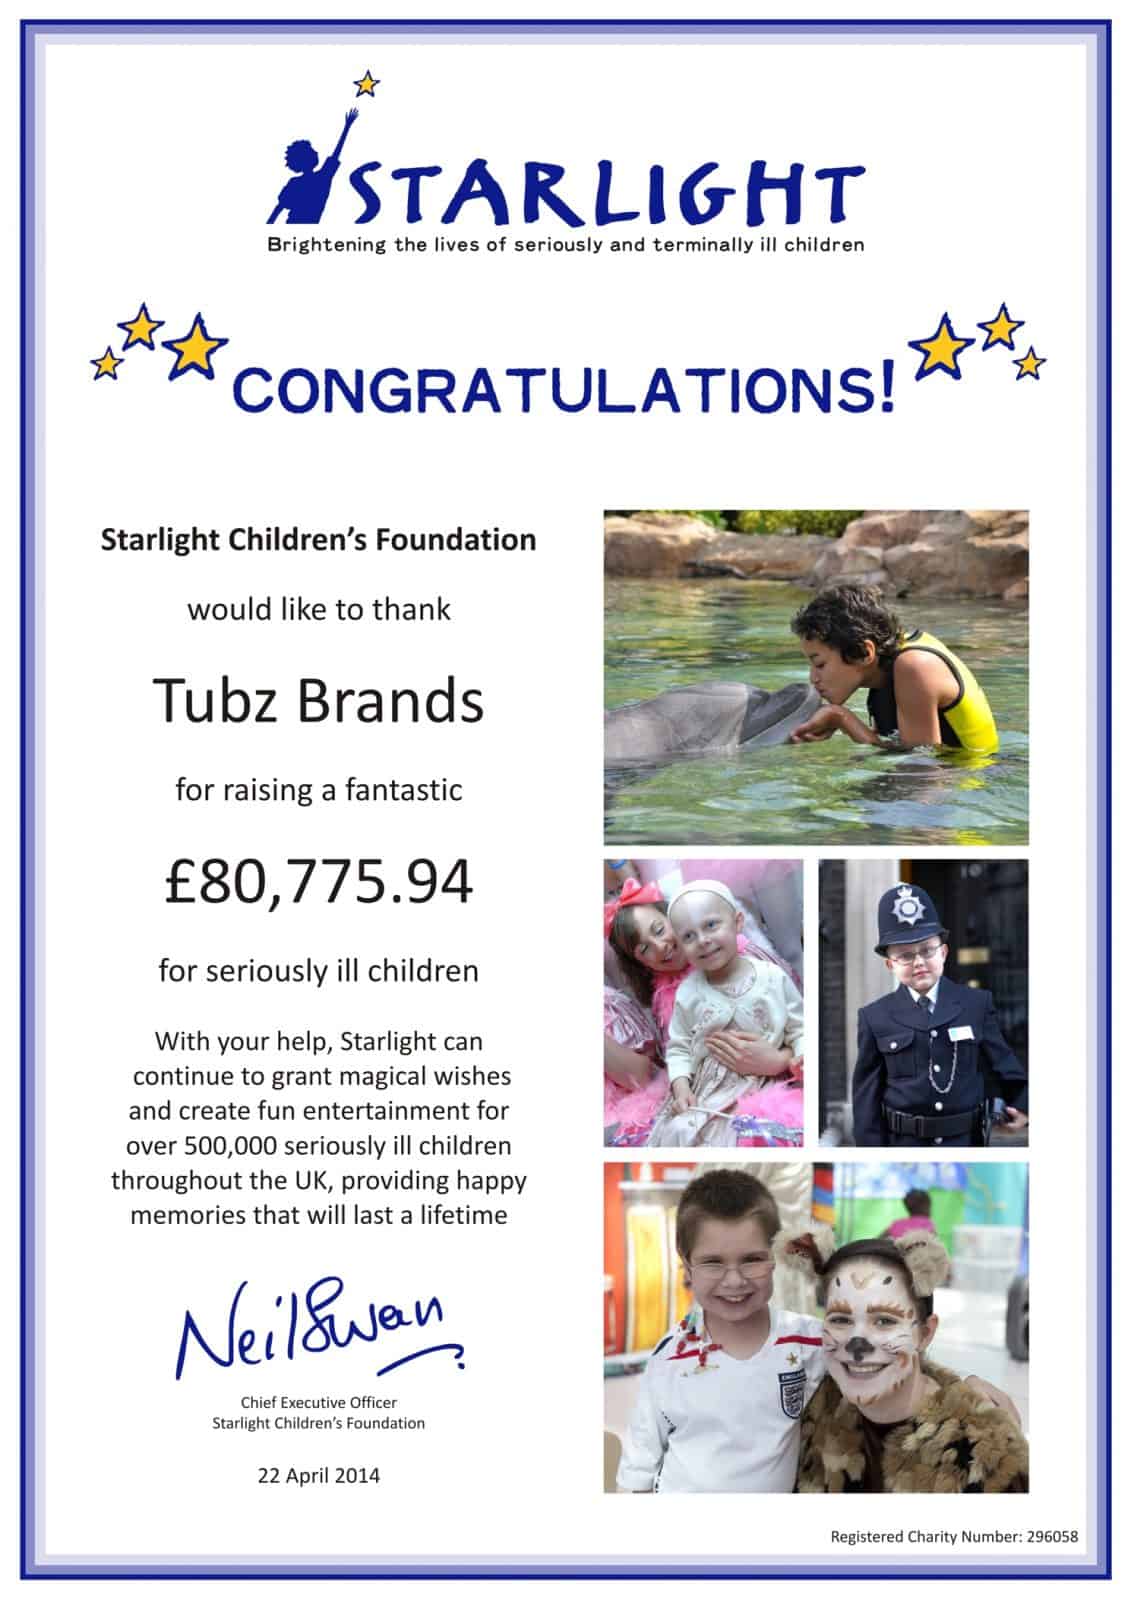 Tubz continue their charitable donations into 2014